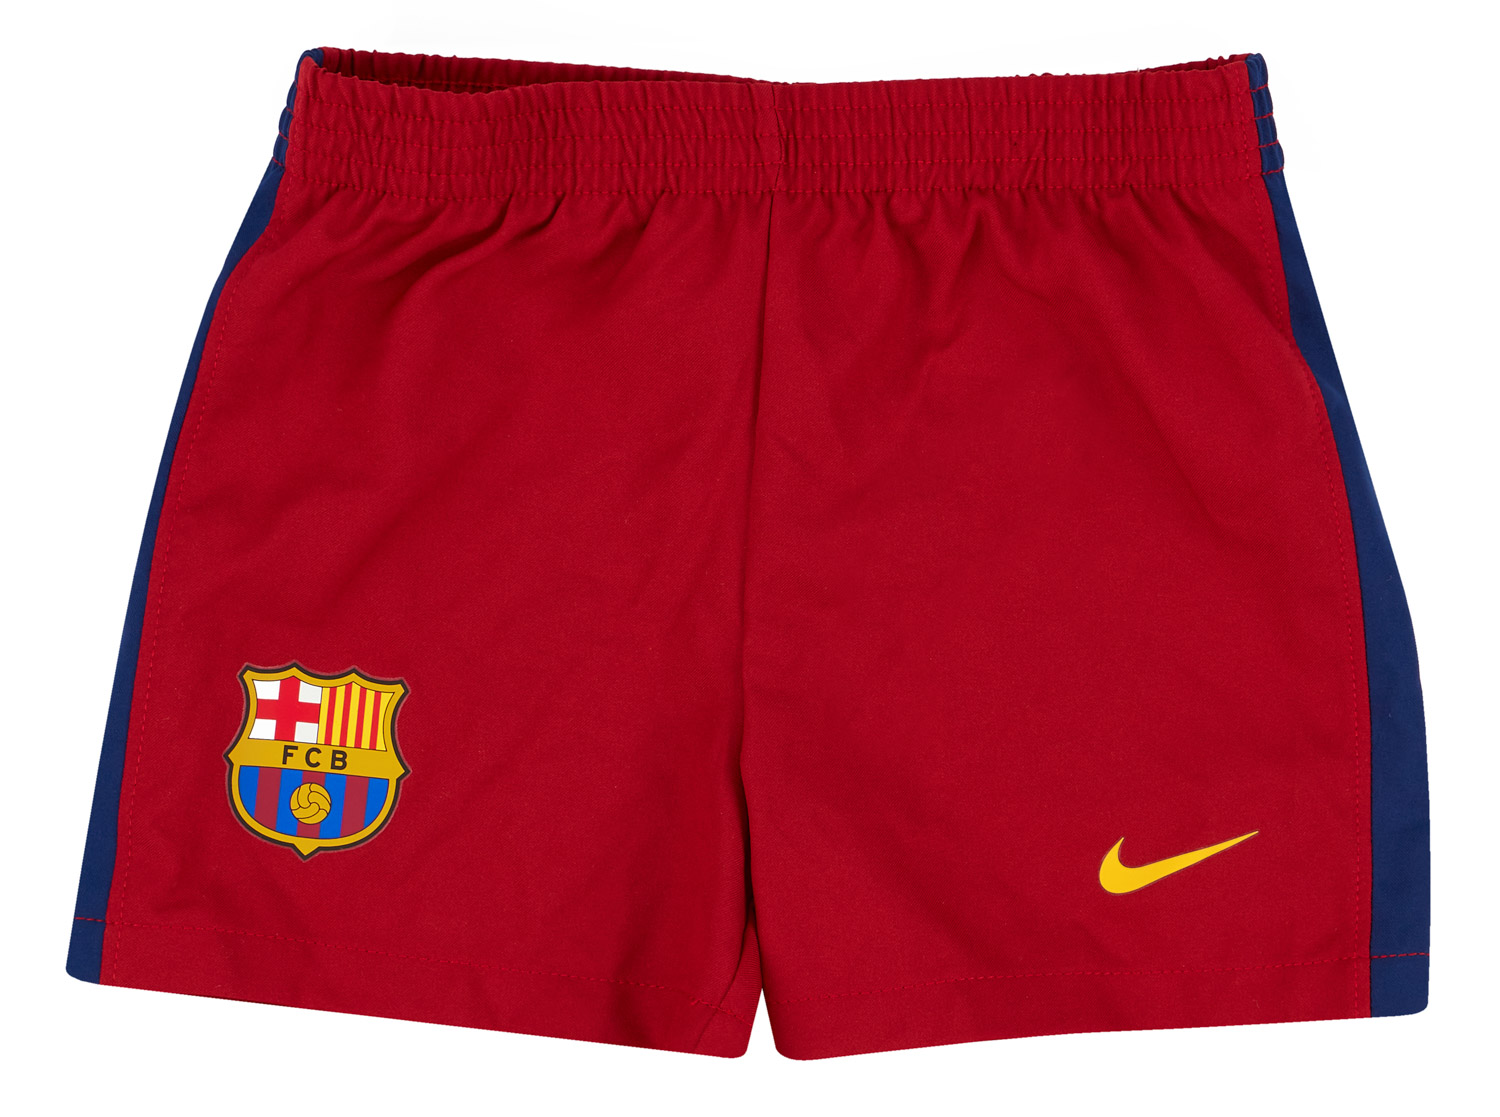 Klant puree AIDS 2015-16 Barcelona Home Full Kit *As New* BABY